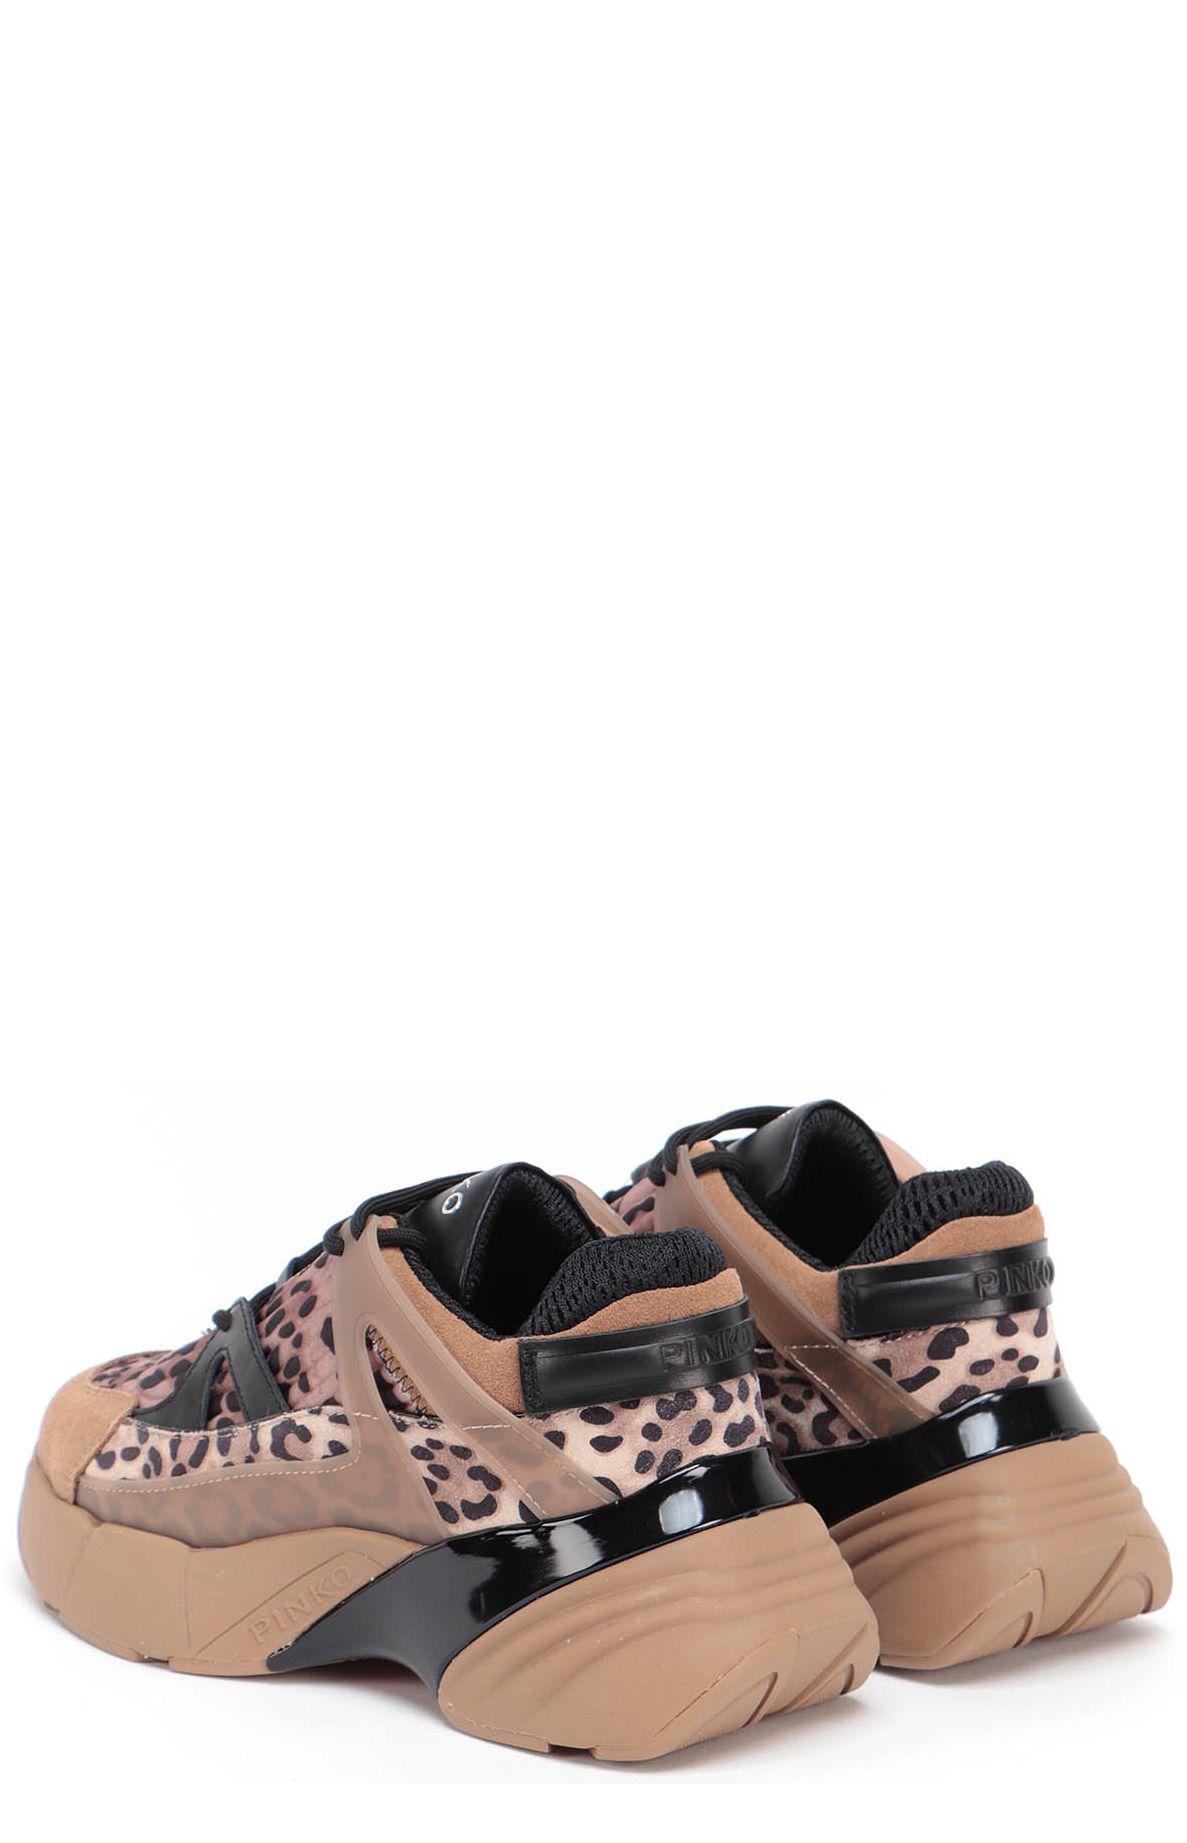 Pinko Leather Leopard Print Chunky Sole Sneakers in Beige (Natural) | Lyst